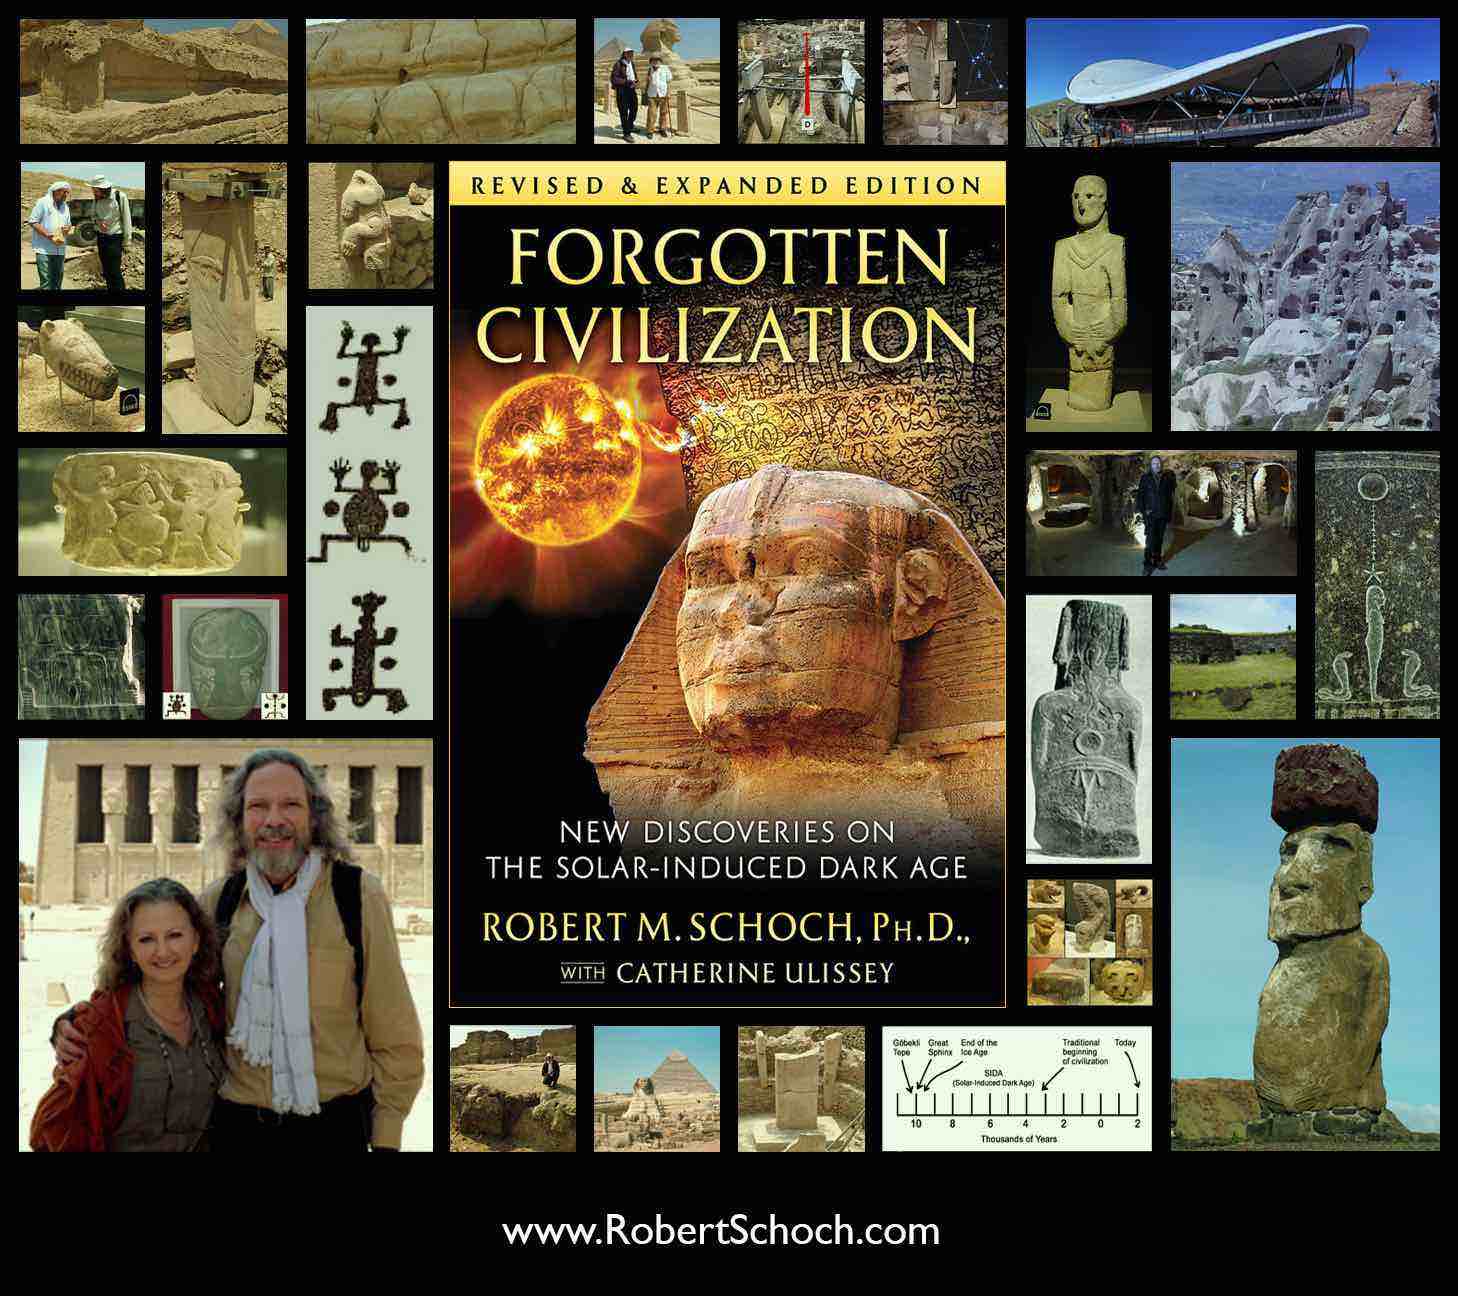 A montage of images from the book Forgotten Civilization: New Discoveries on the Solar-Induced Dark Age